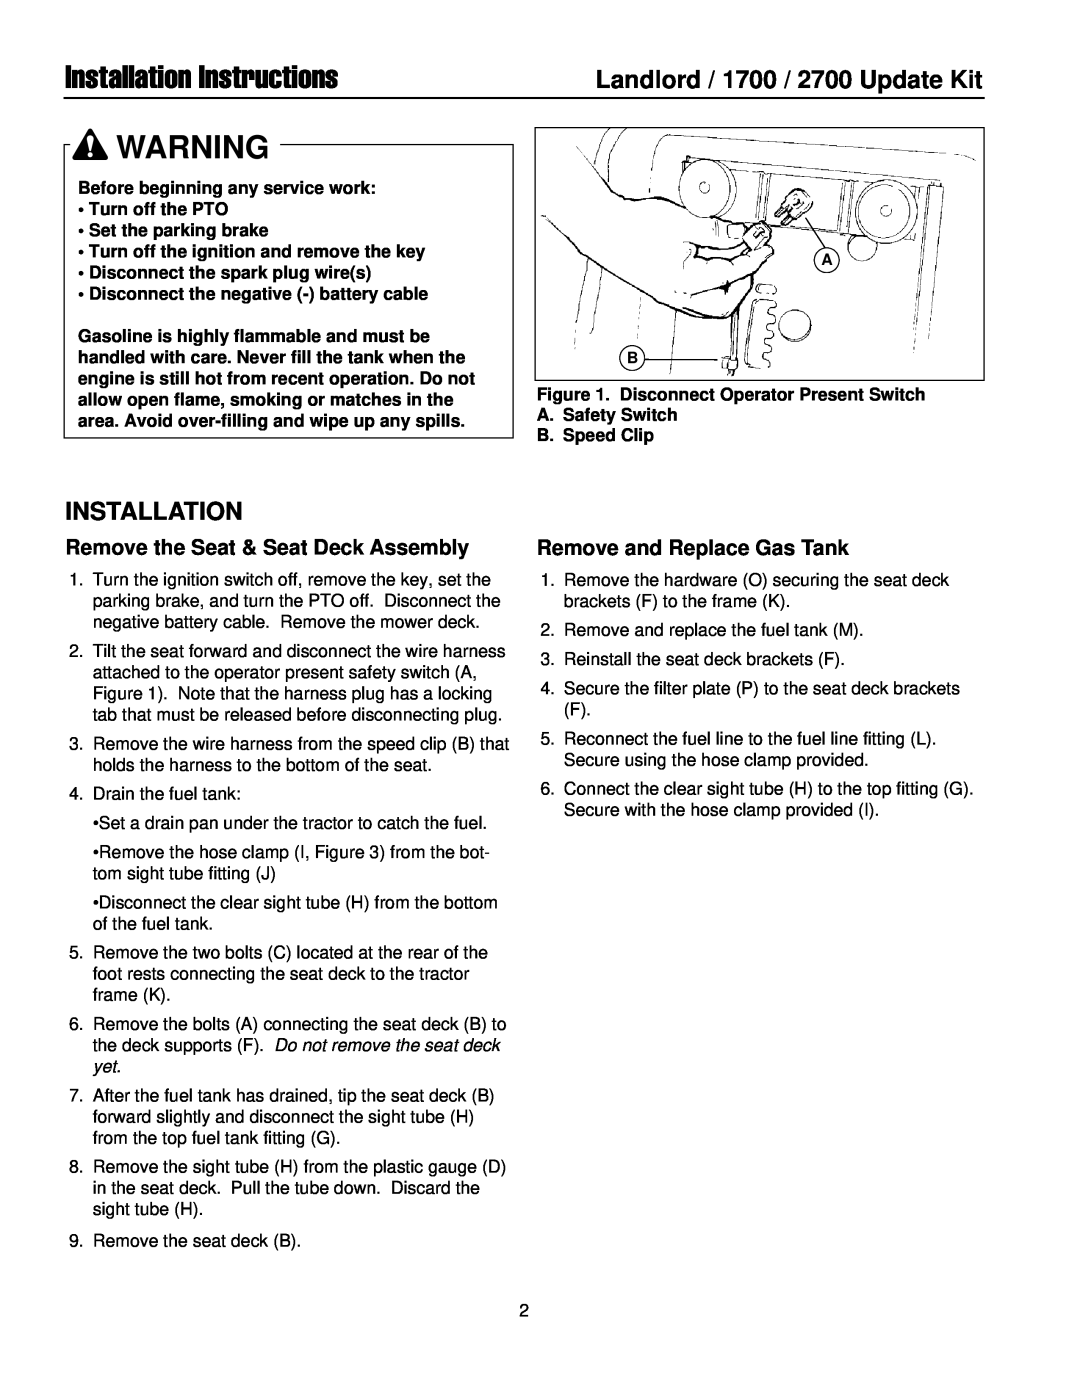 Simplicity 1704108 Installation Instructions, Landlord / 1700 / 2700 Update Kit, Remove the Seat & Seat Deck Assembly 